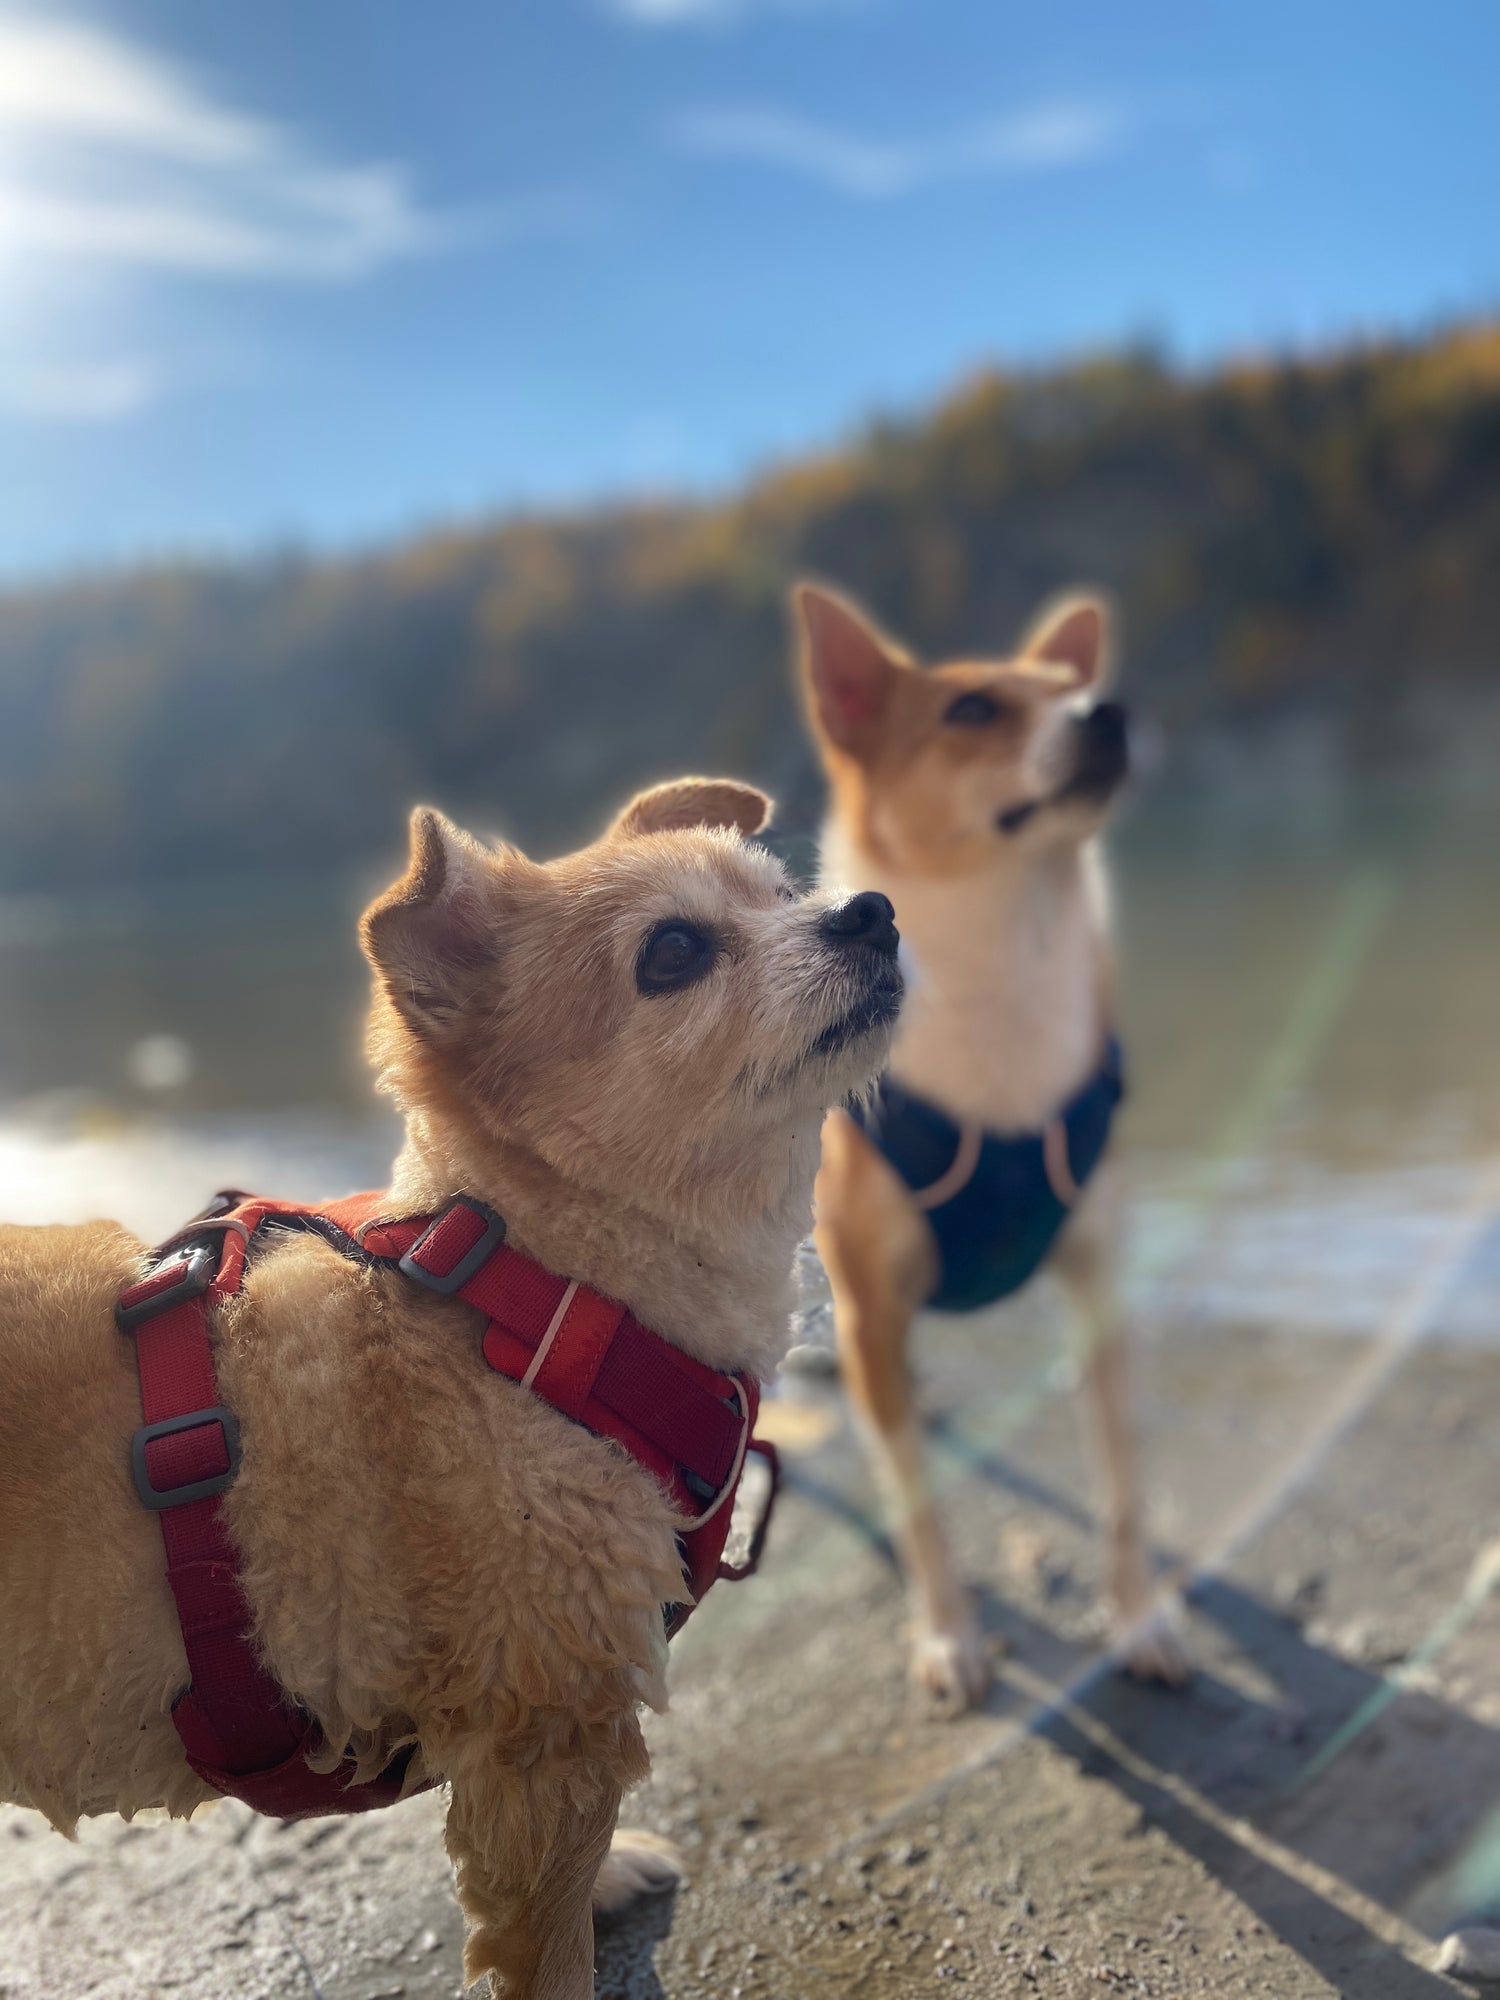 Two happy dogs adopted by their owner are looking up at their human companion while out for a walk by a peaceful lake.